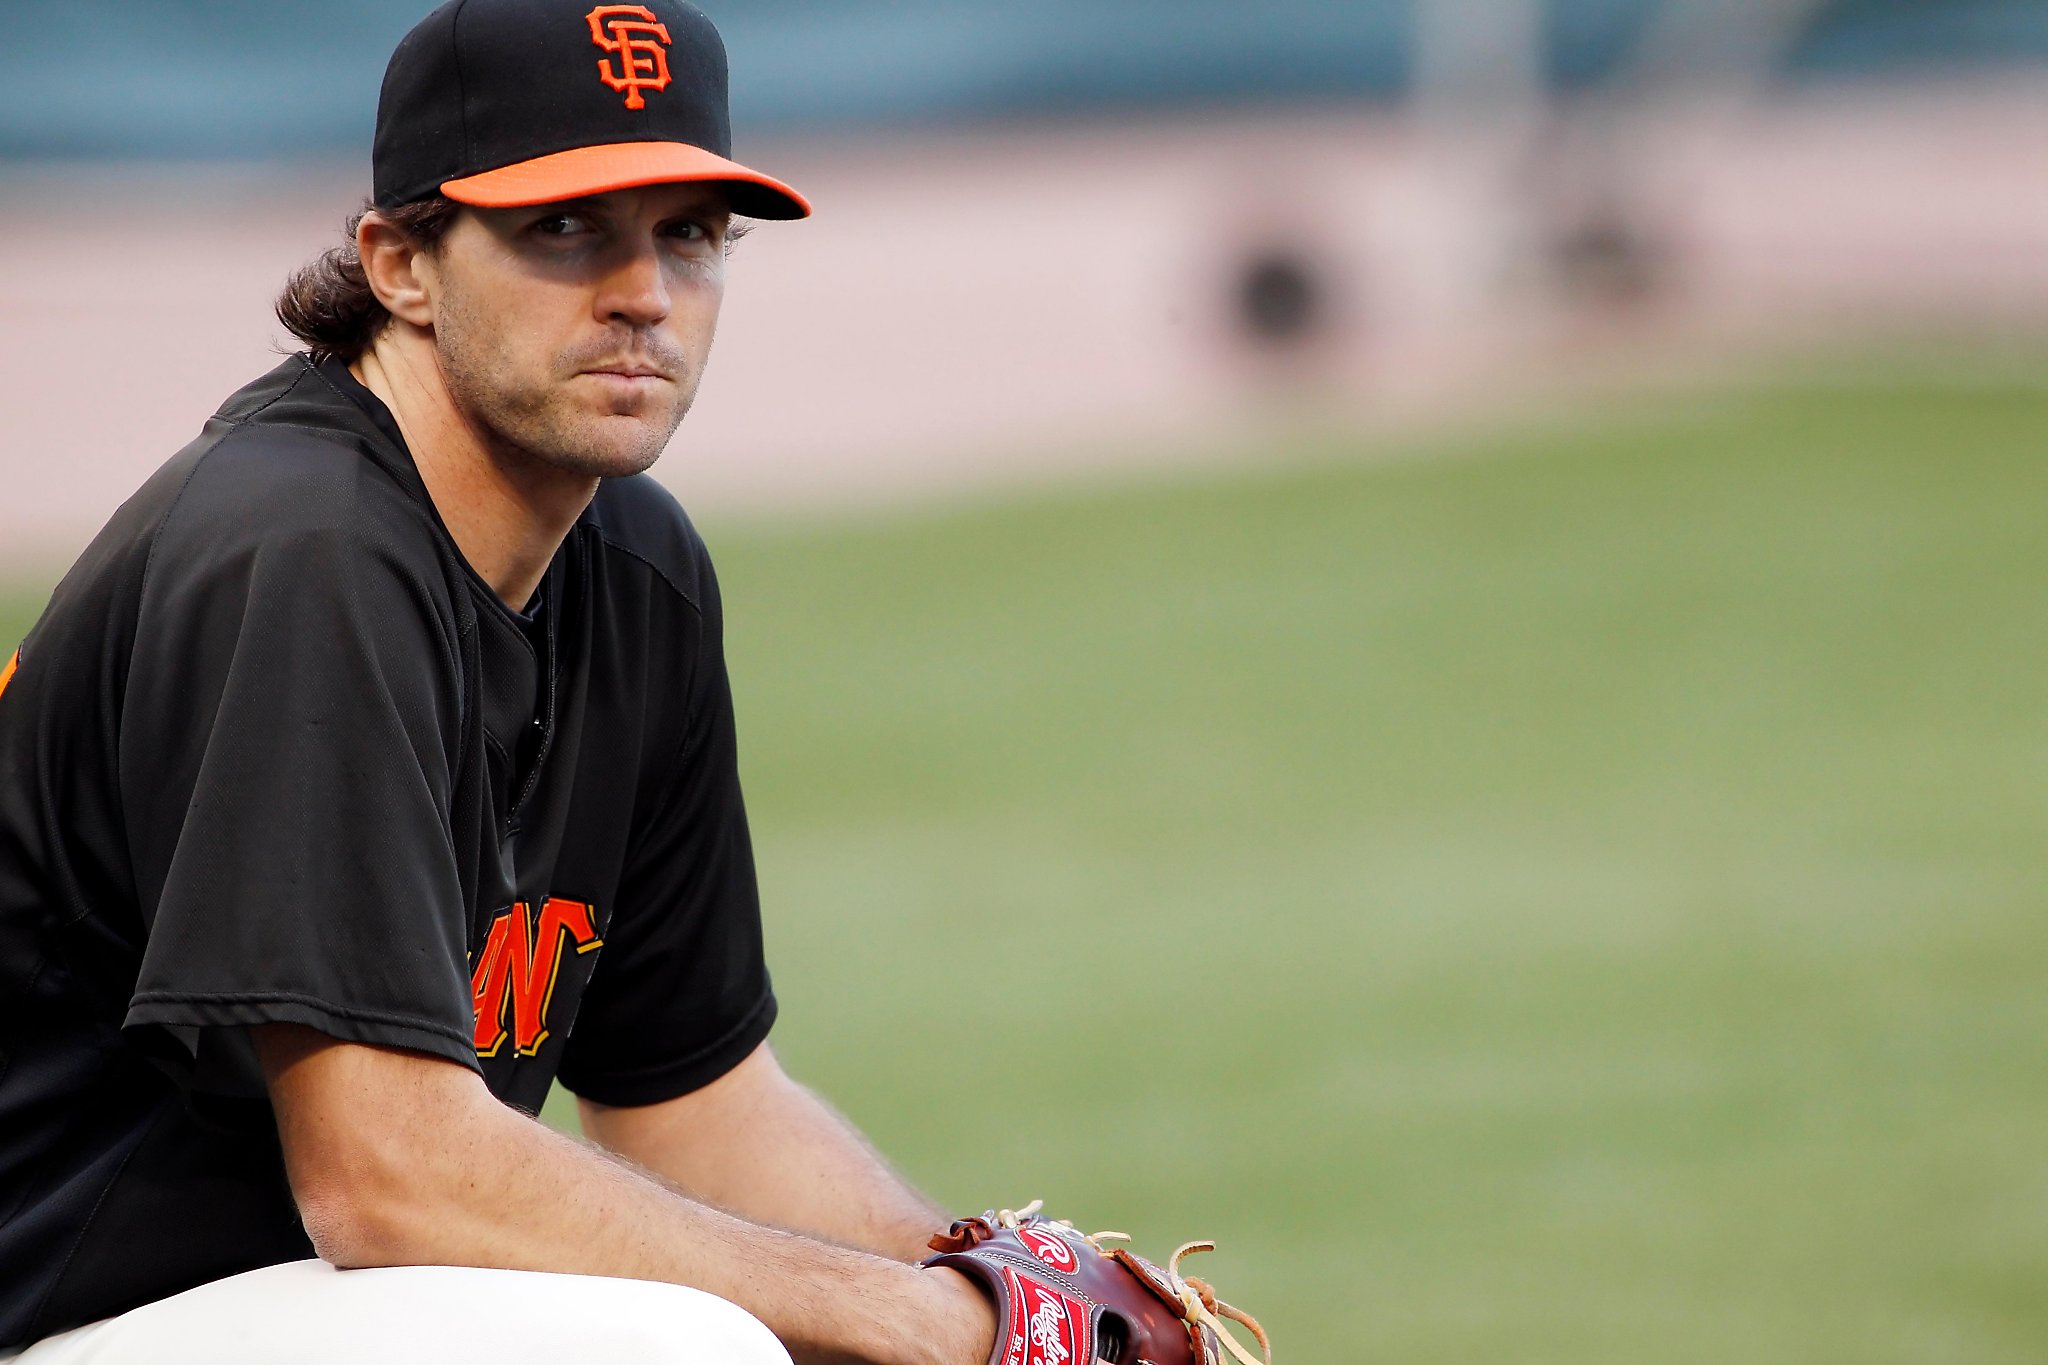 Barry Zito says he rooted against Giants in 2010 World Series in new memoir  [report] – KNBR